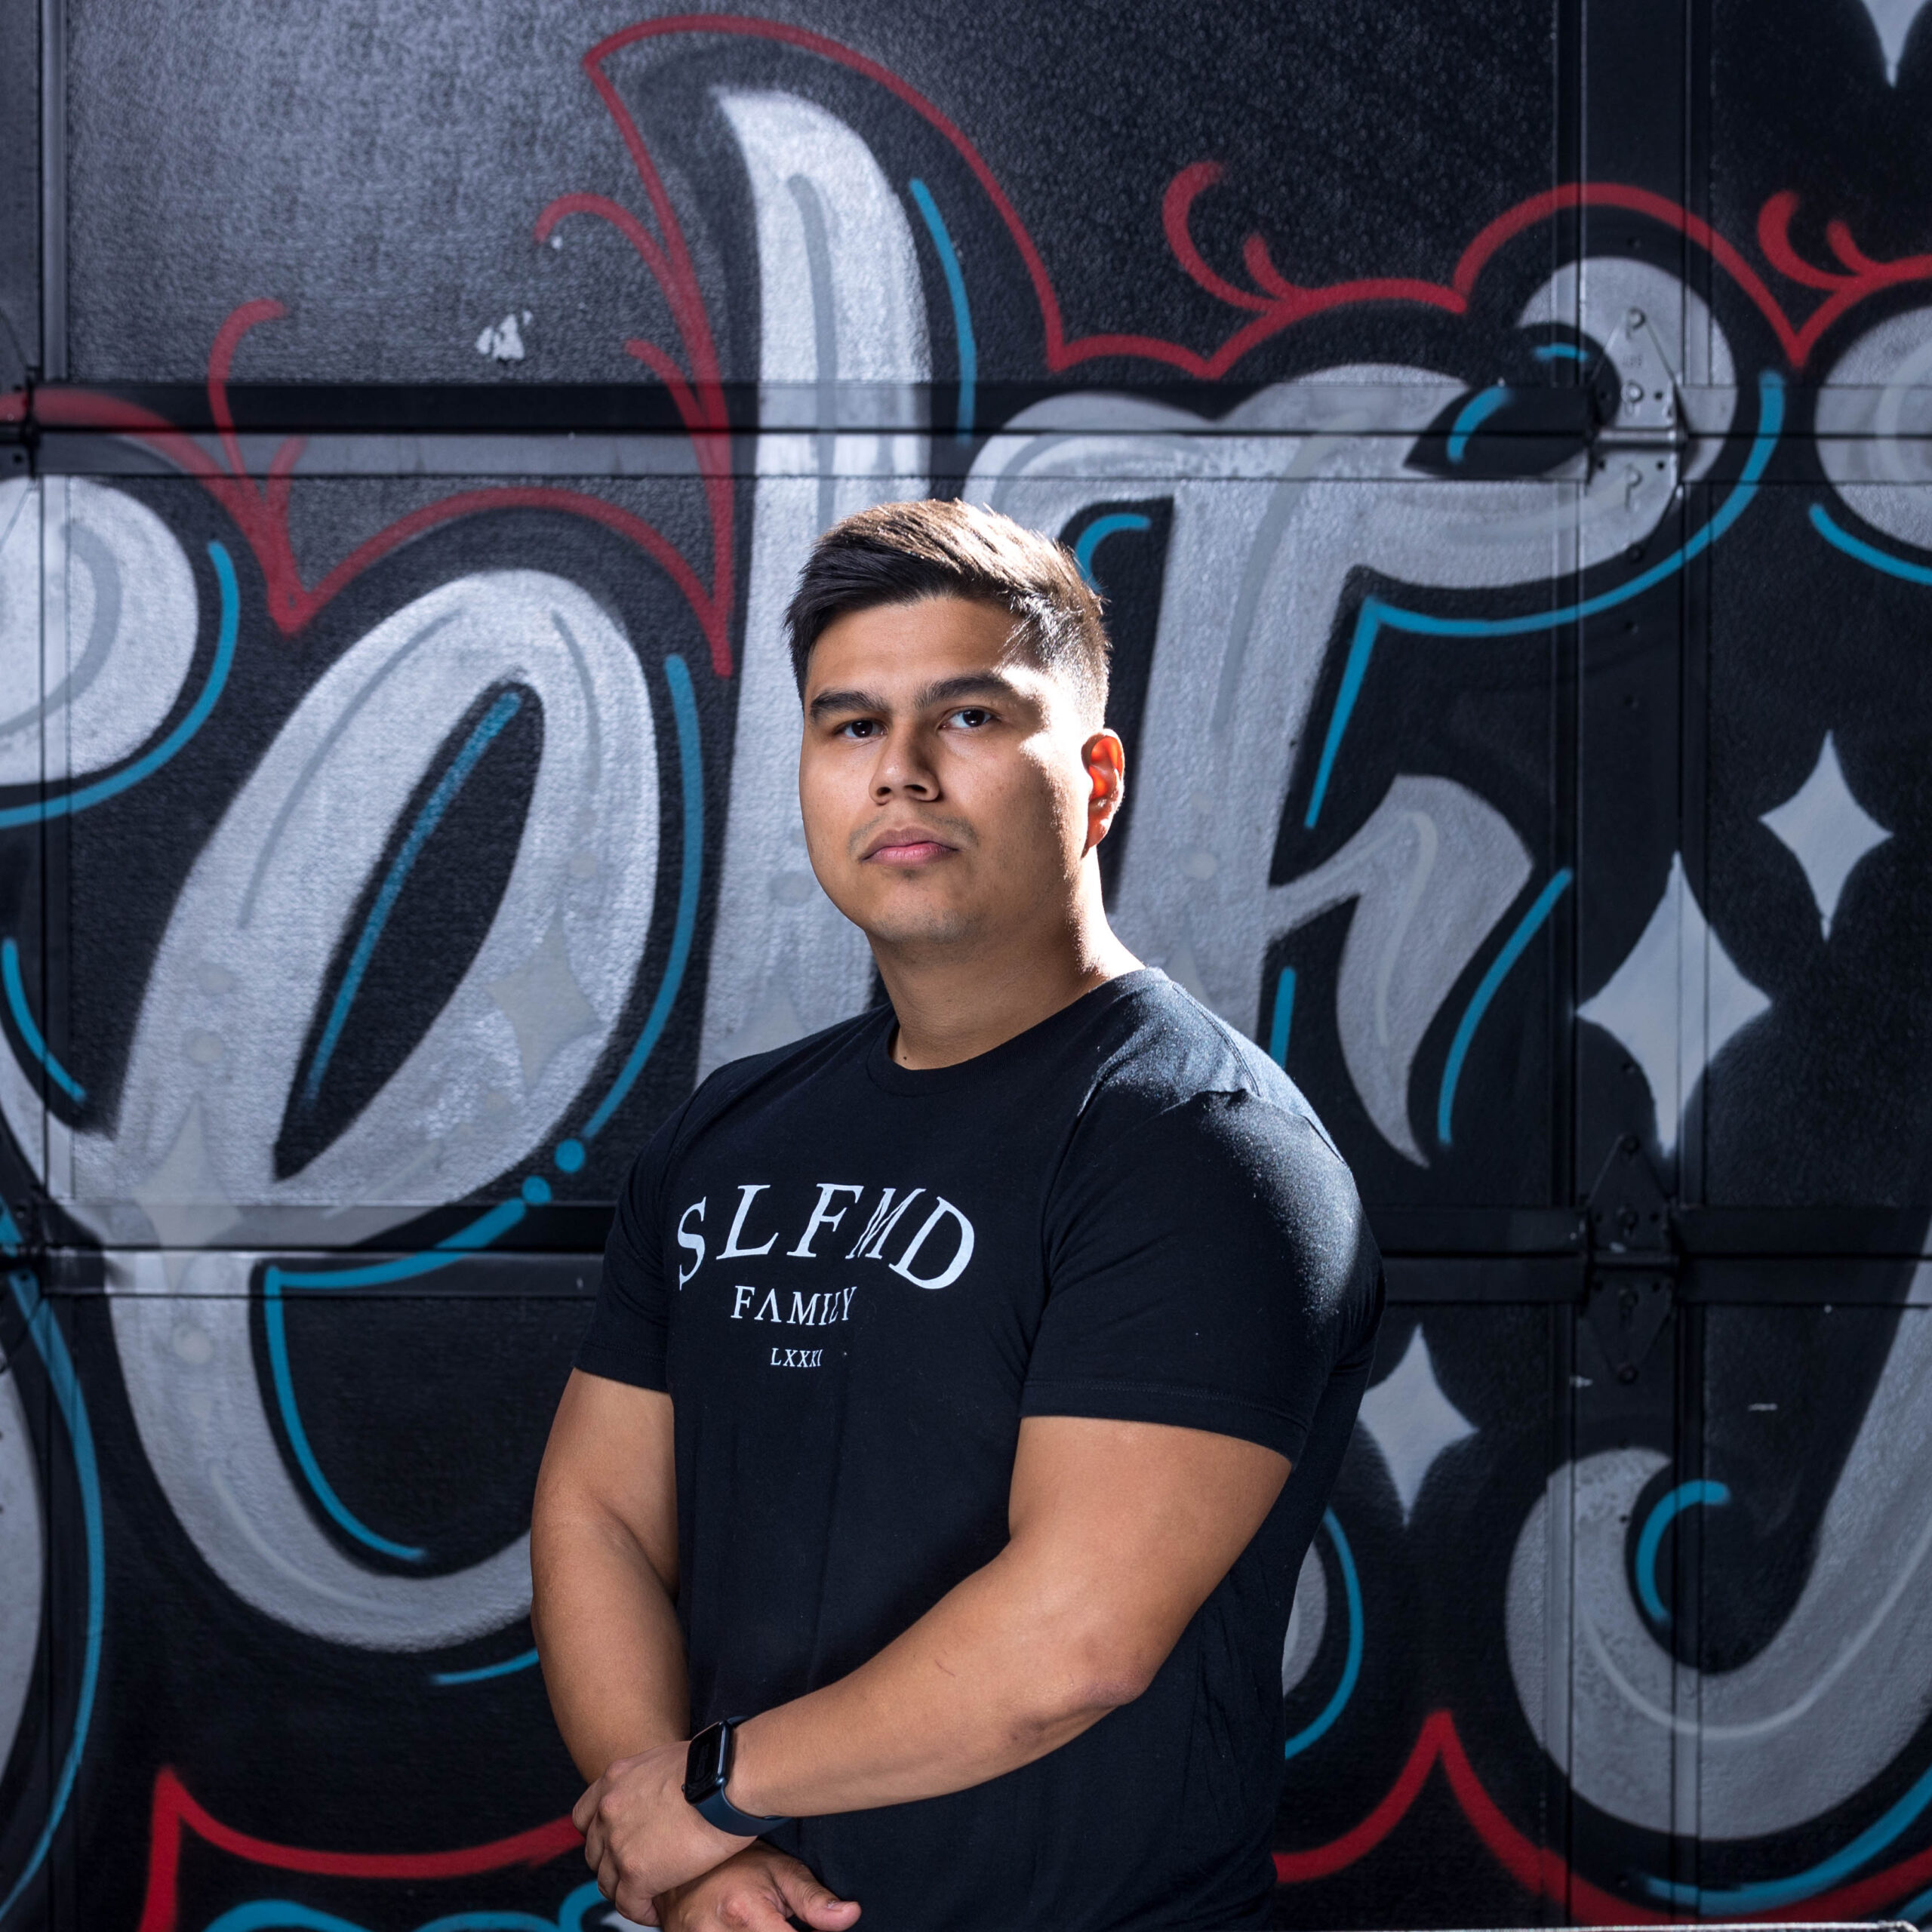 Luis Carrasco competitive Powerlifter and offer Comprehensive Powerlifting Programming